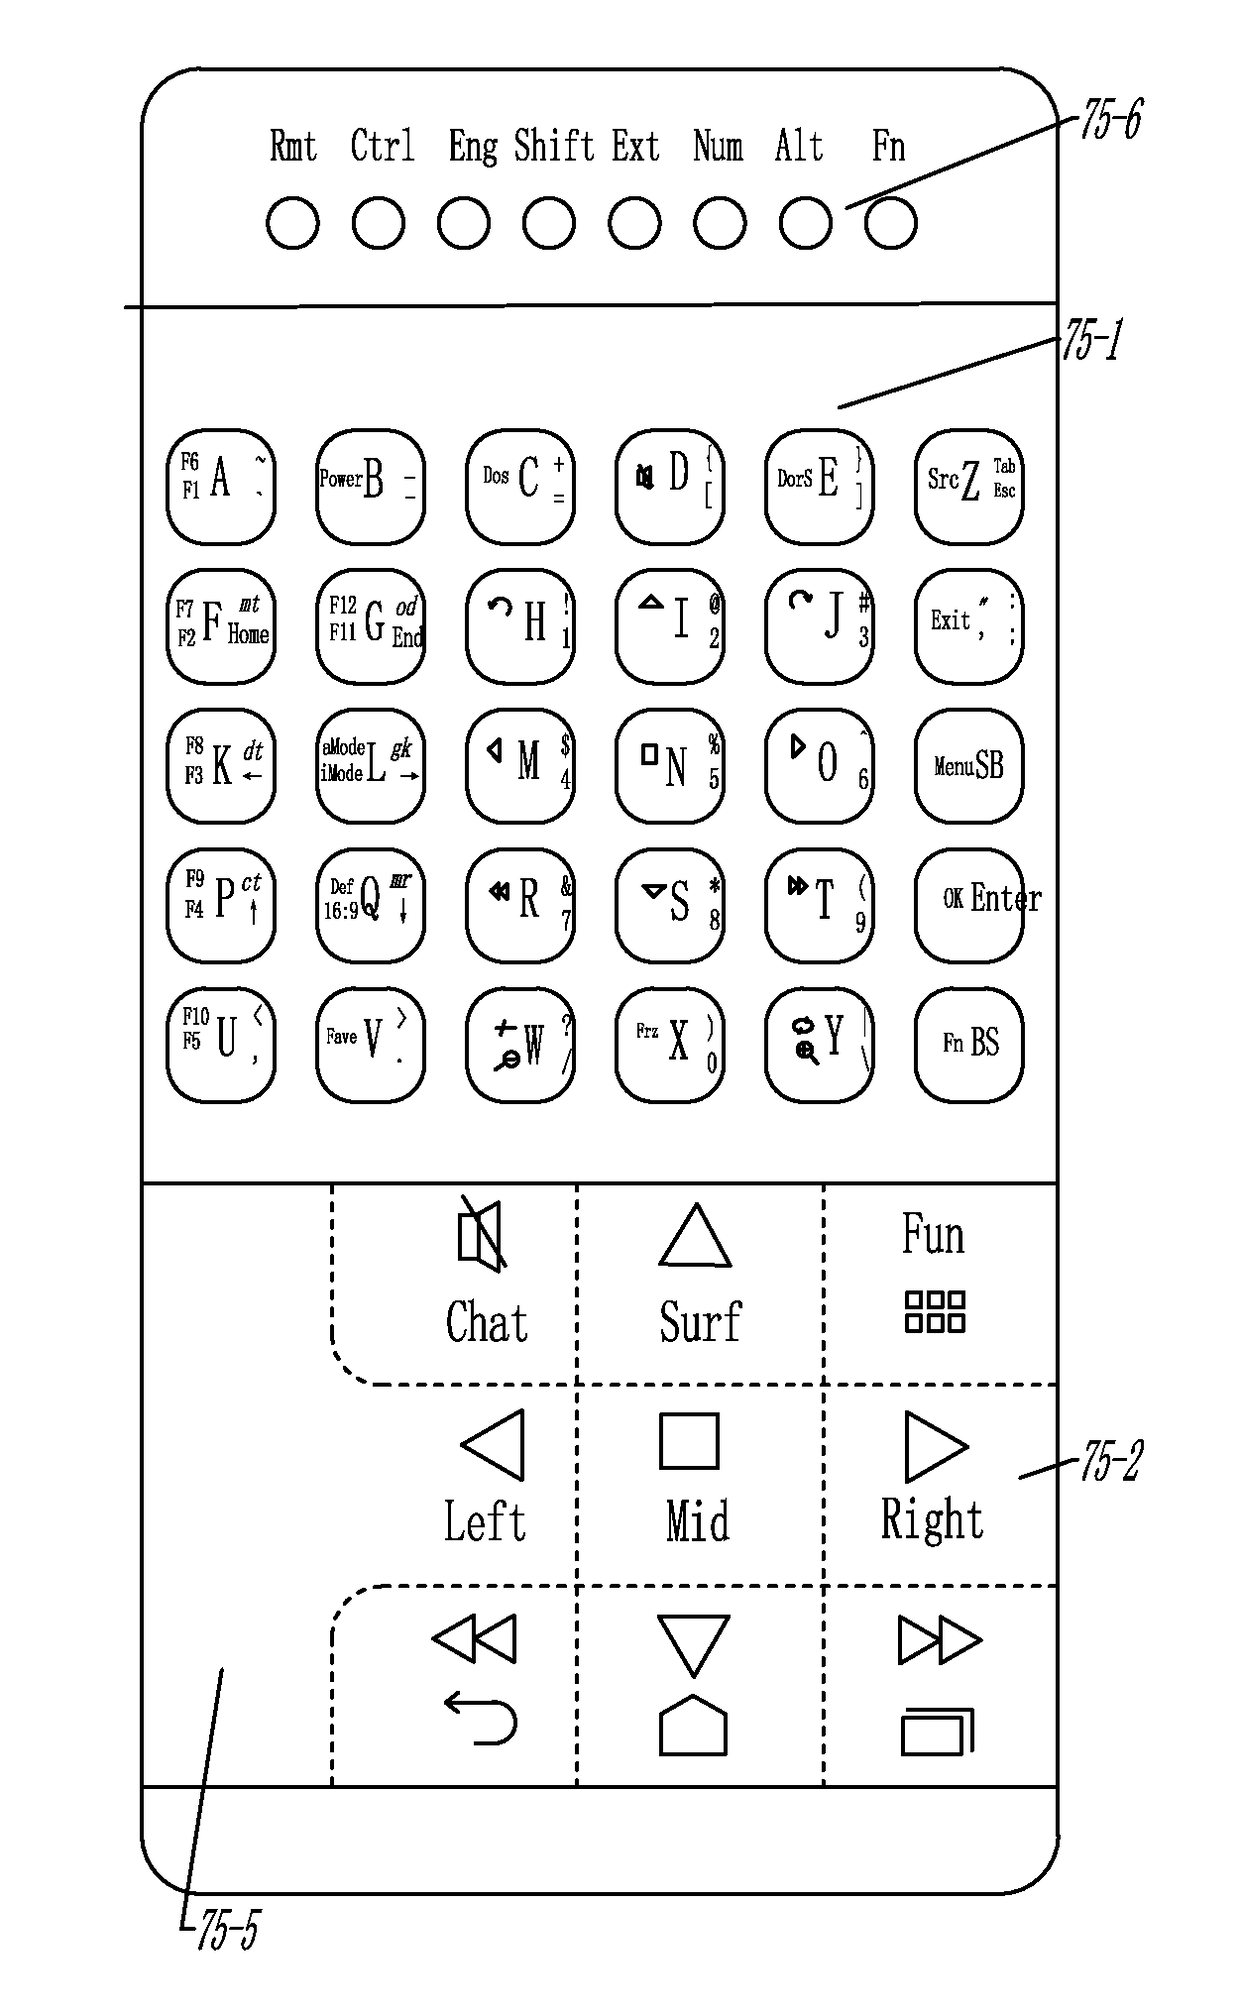 Keyboard and mouse of handheld digital device